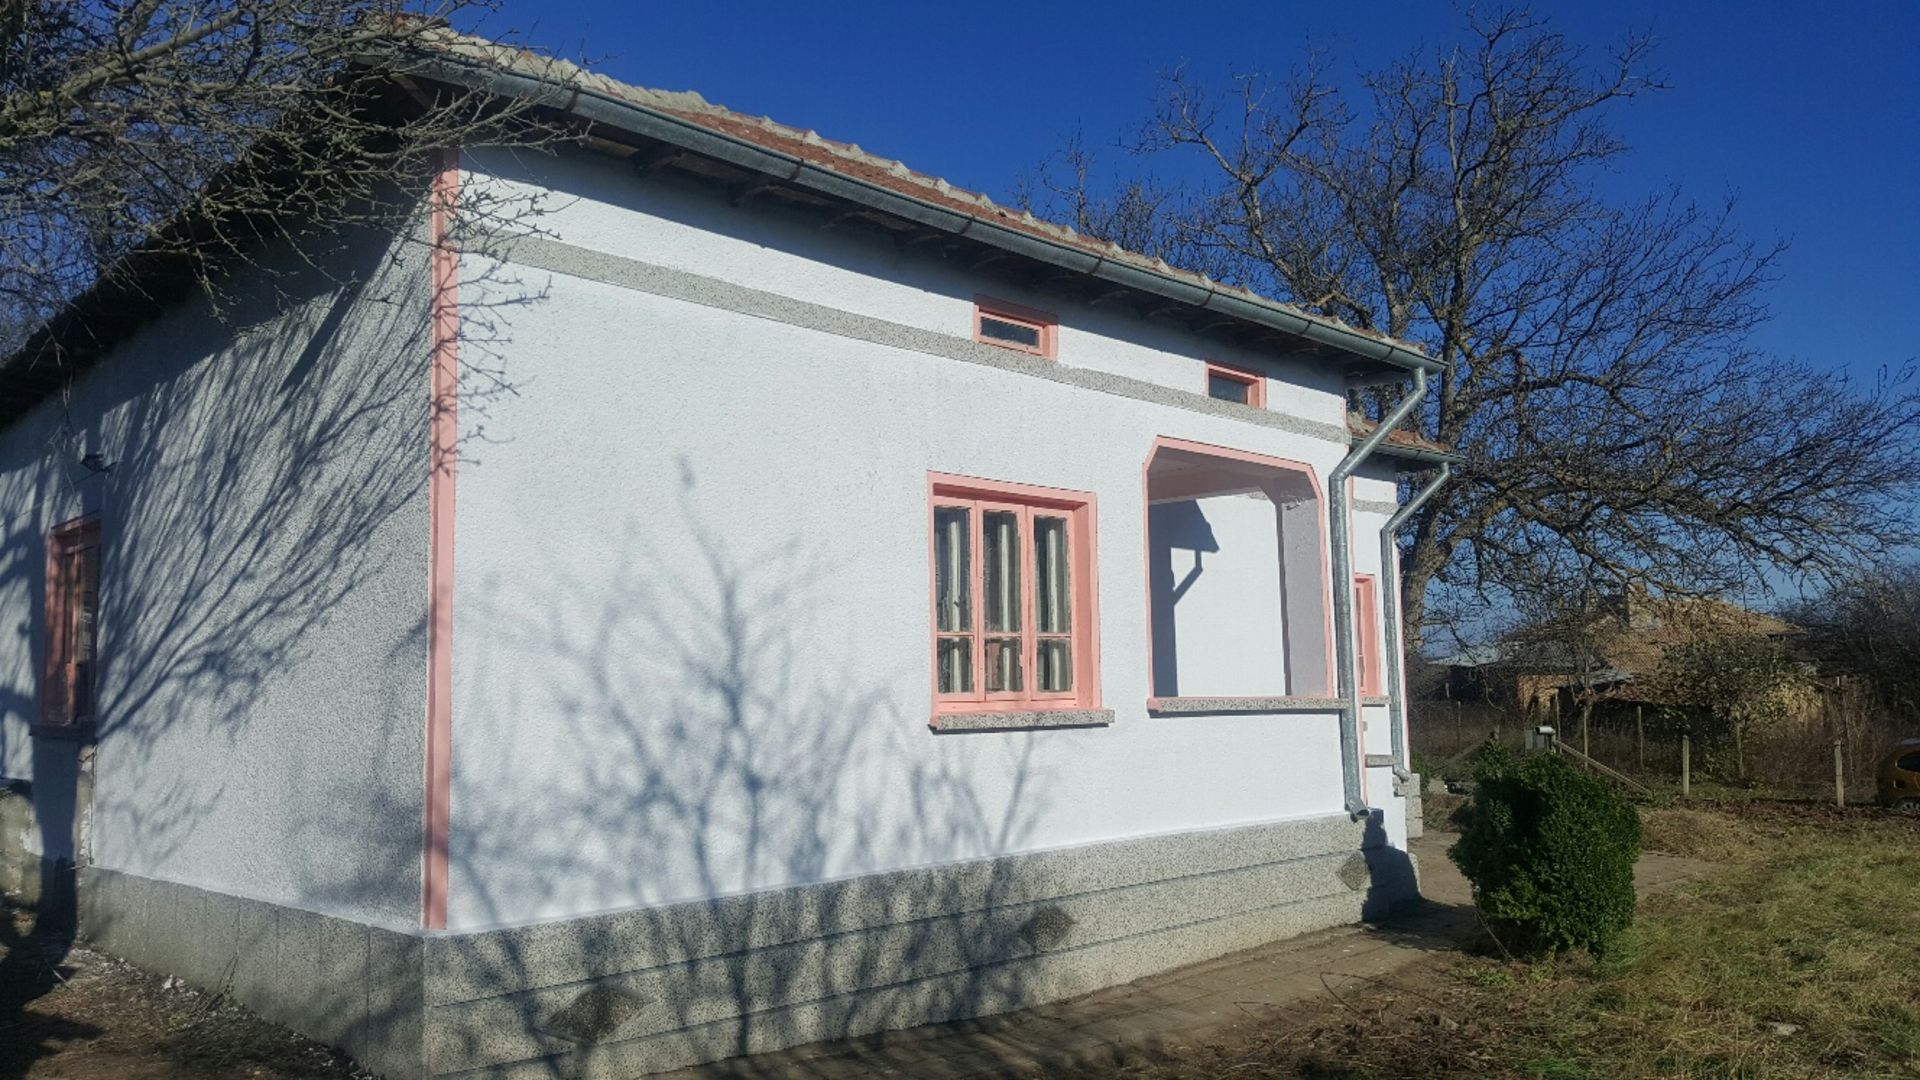 Ready to move into 5 room Bulgarian cottage for sale. With land not far from coast - Image 5 of 42